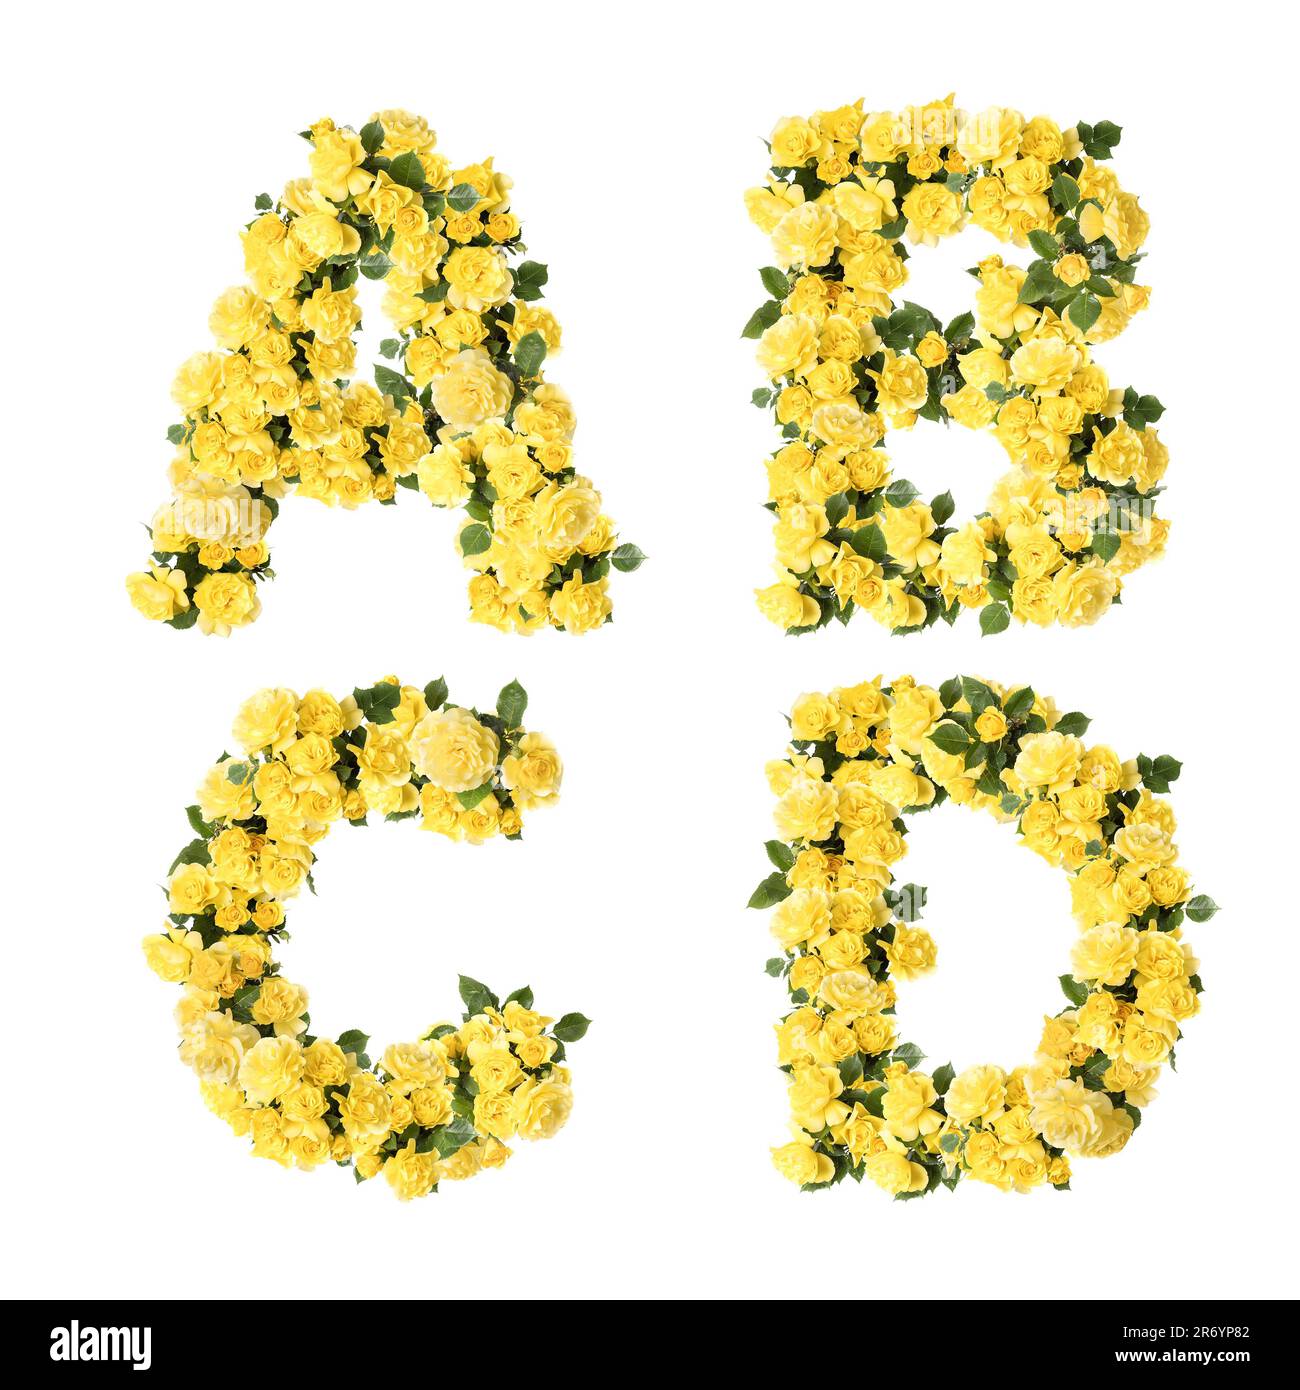 3D illustration of yellow rose flowers capital letter alphabet - letters A-D Stock Photo